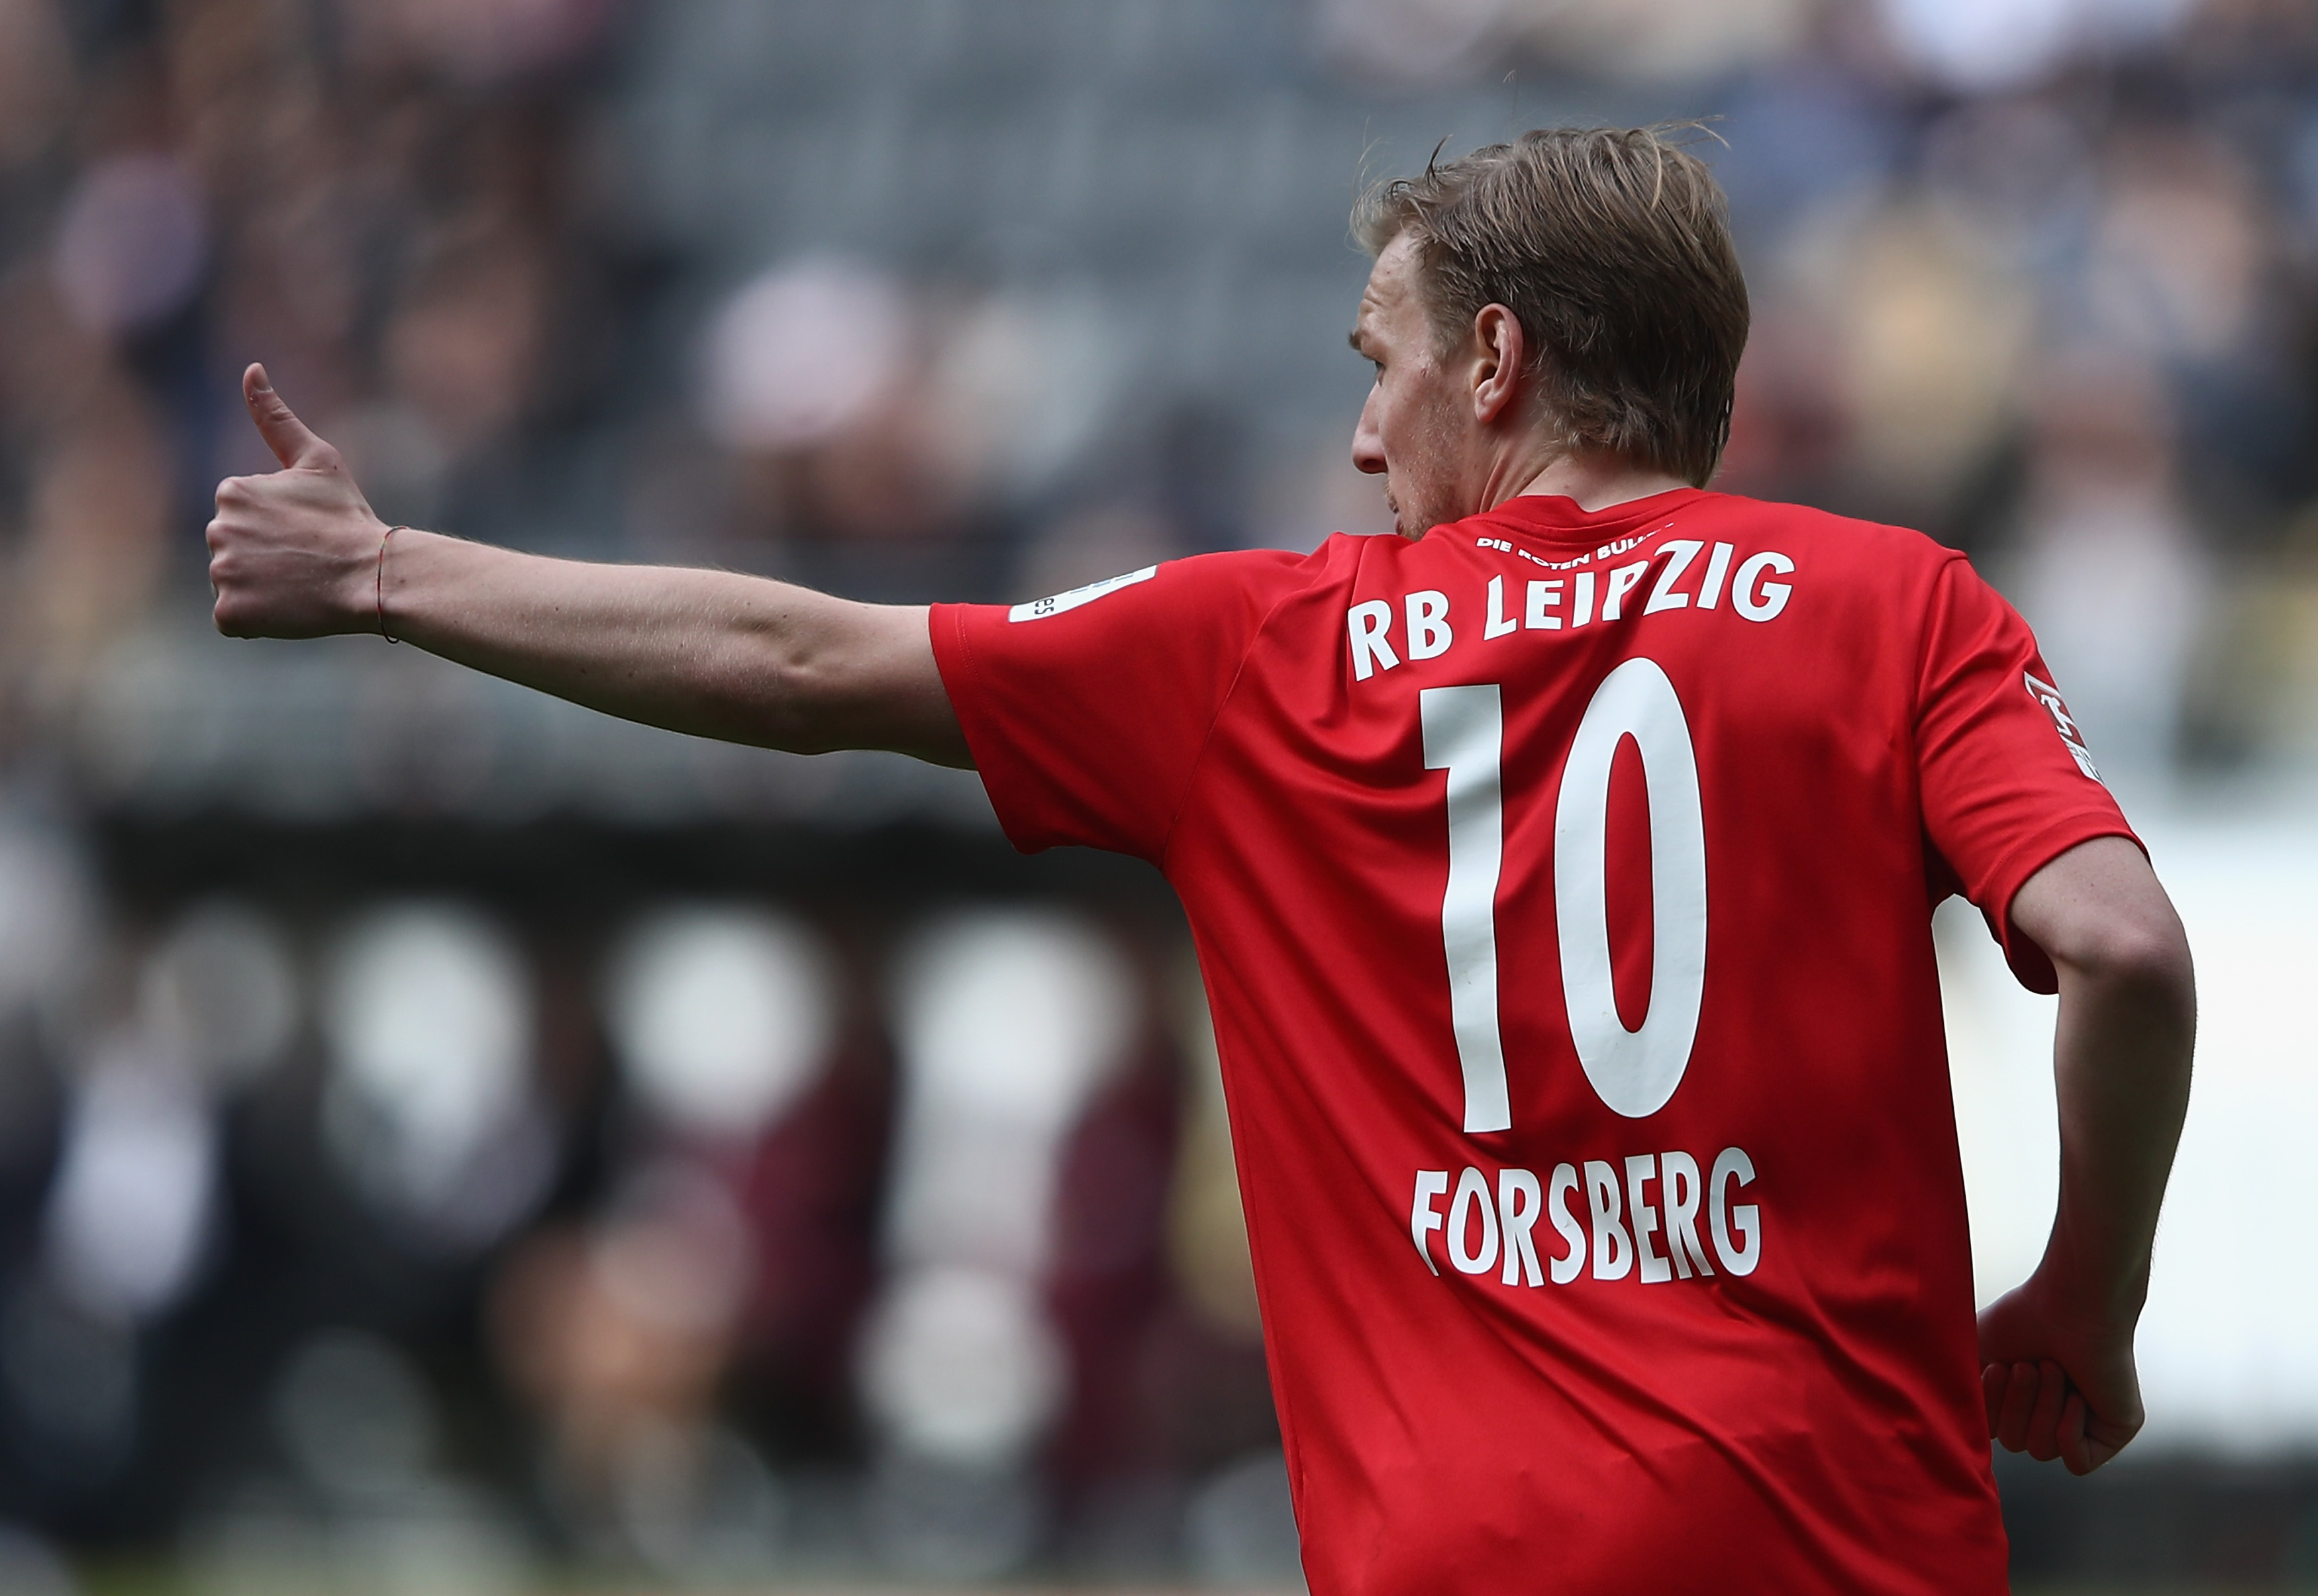 FRANKFURT AM MAIN, GERMANY - MAY 20: Emil Forsberg of Leipzig reacts during the Bundesliga match between Eintracht Frankfurt and RB Leipzig at Commerzbank-Arena on May 20, 2017 in Frankfurt am Main, Germany.  (Photo by Alex Grimm/Bongarts/Getty Images)